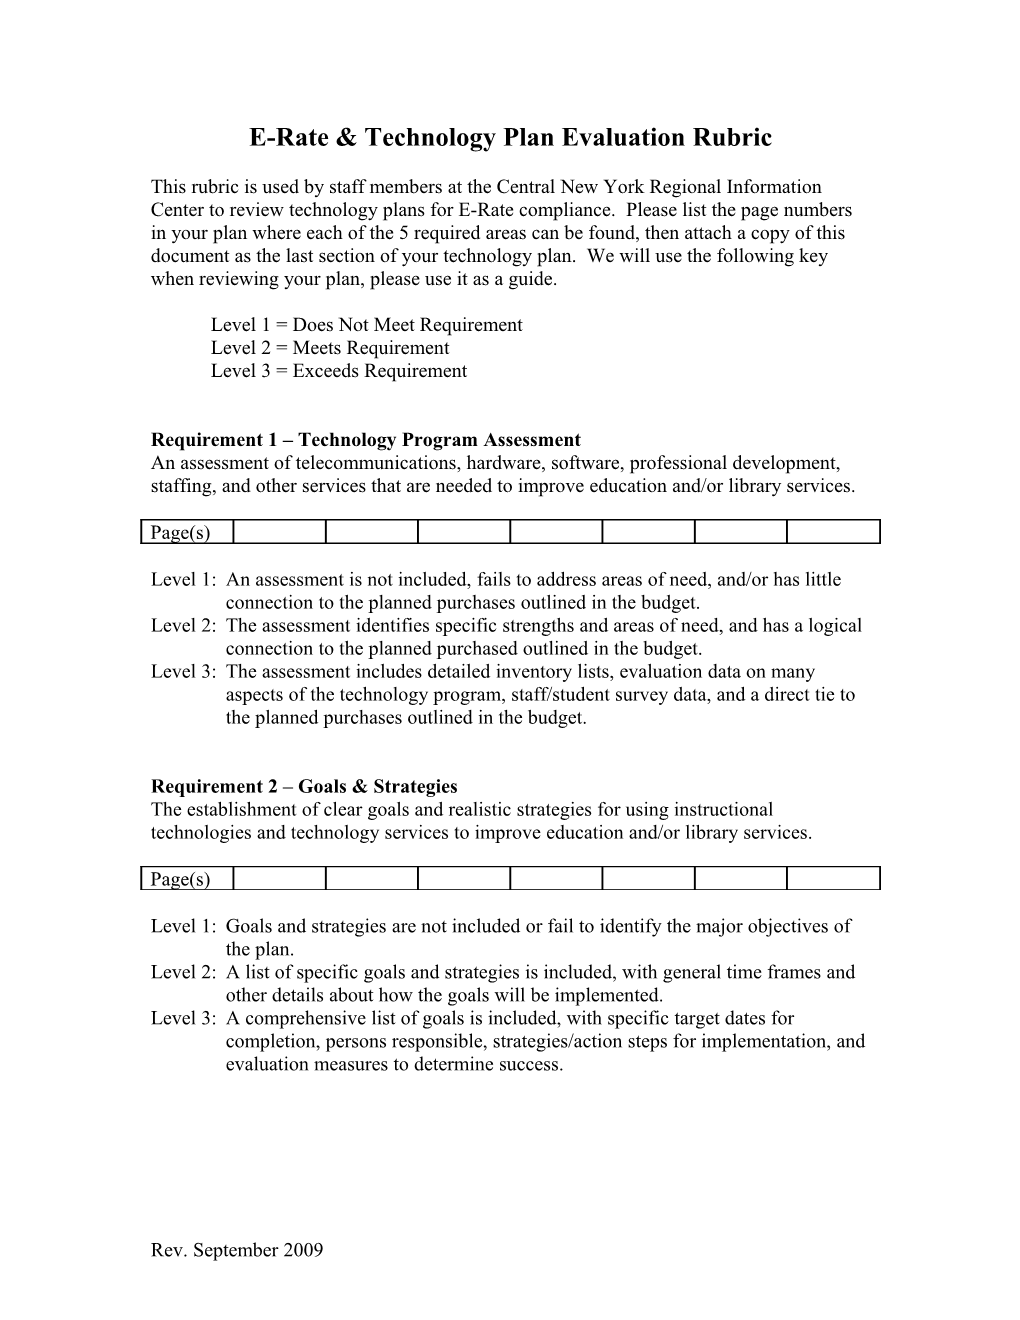 E-Rate & Technology Plan Evaluation Rubric